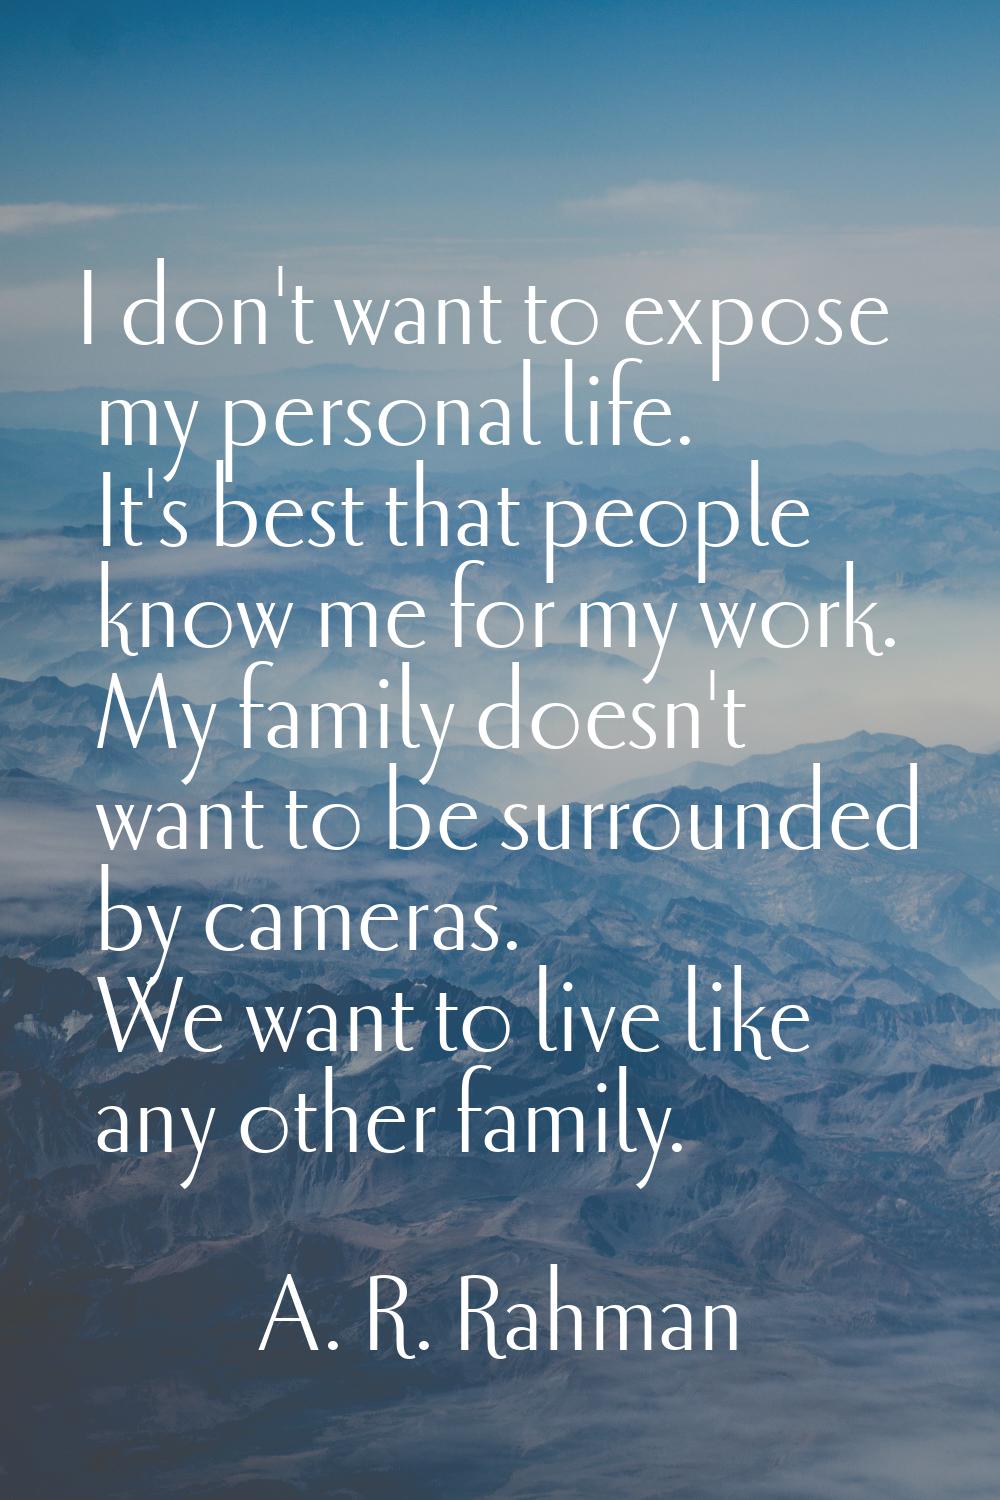 I don't want to expose my personal life. It's best that people know me for my work. My family doesn